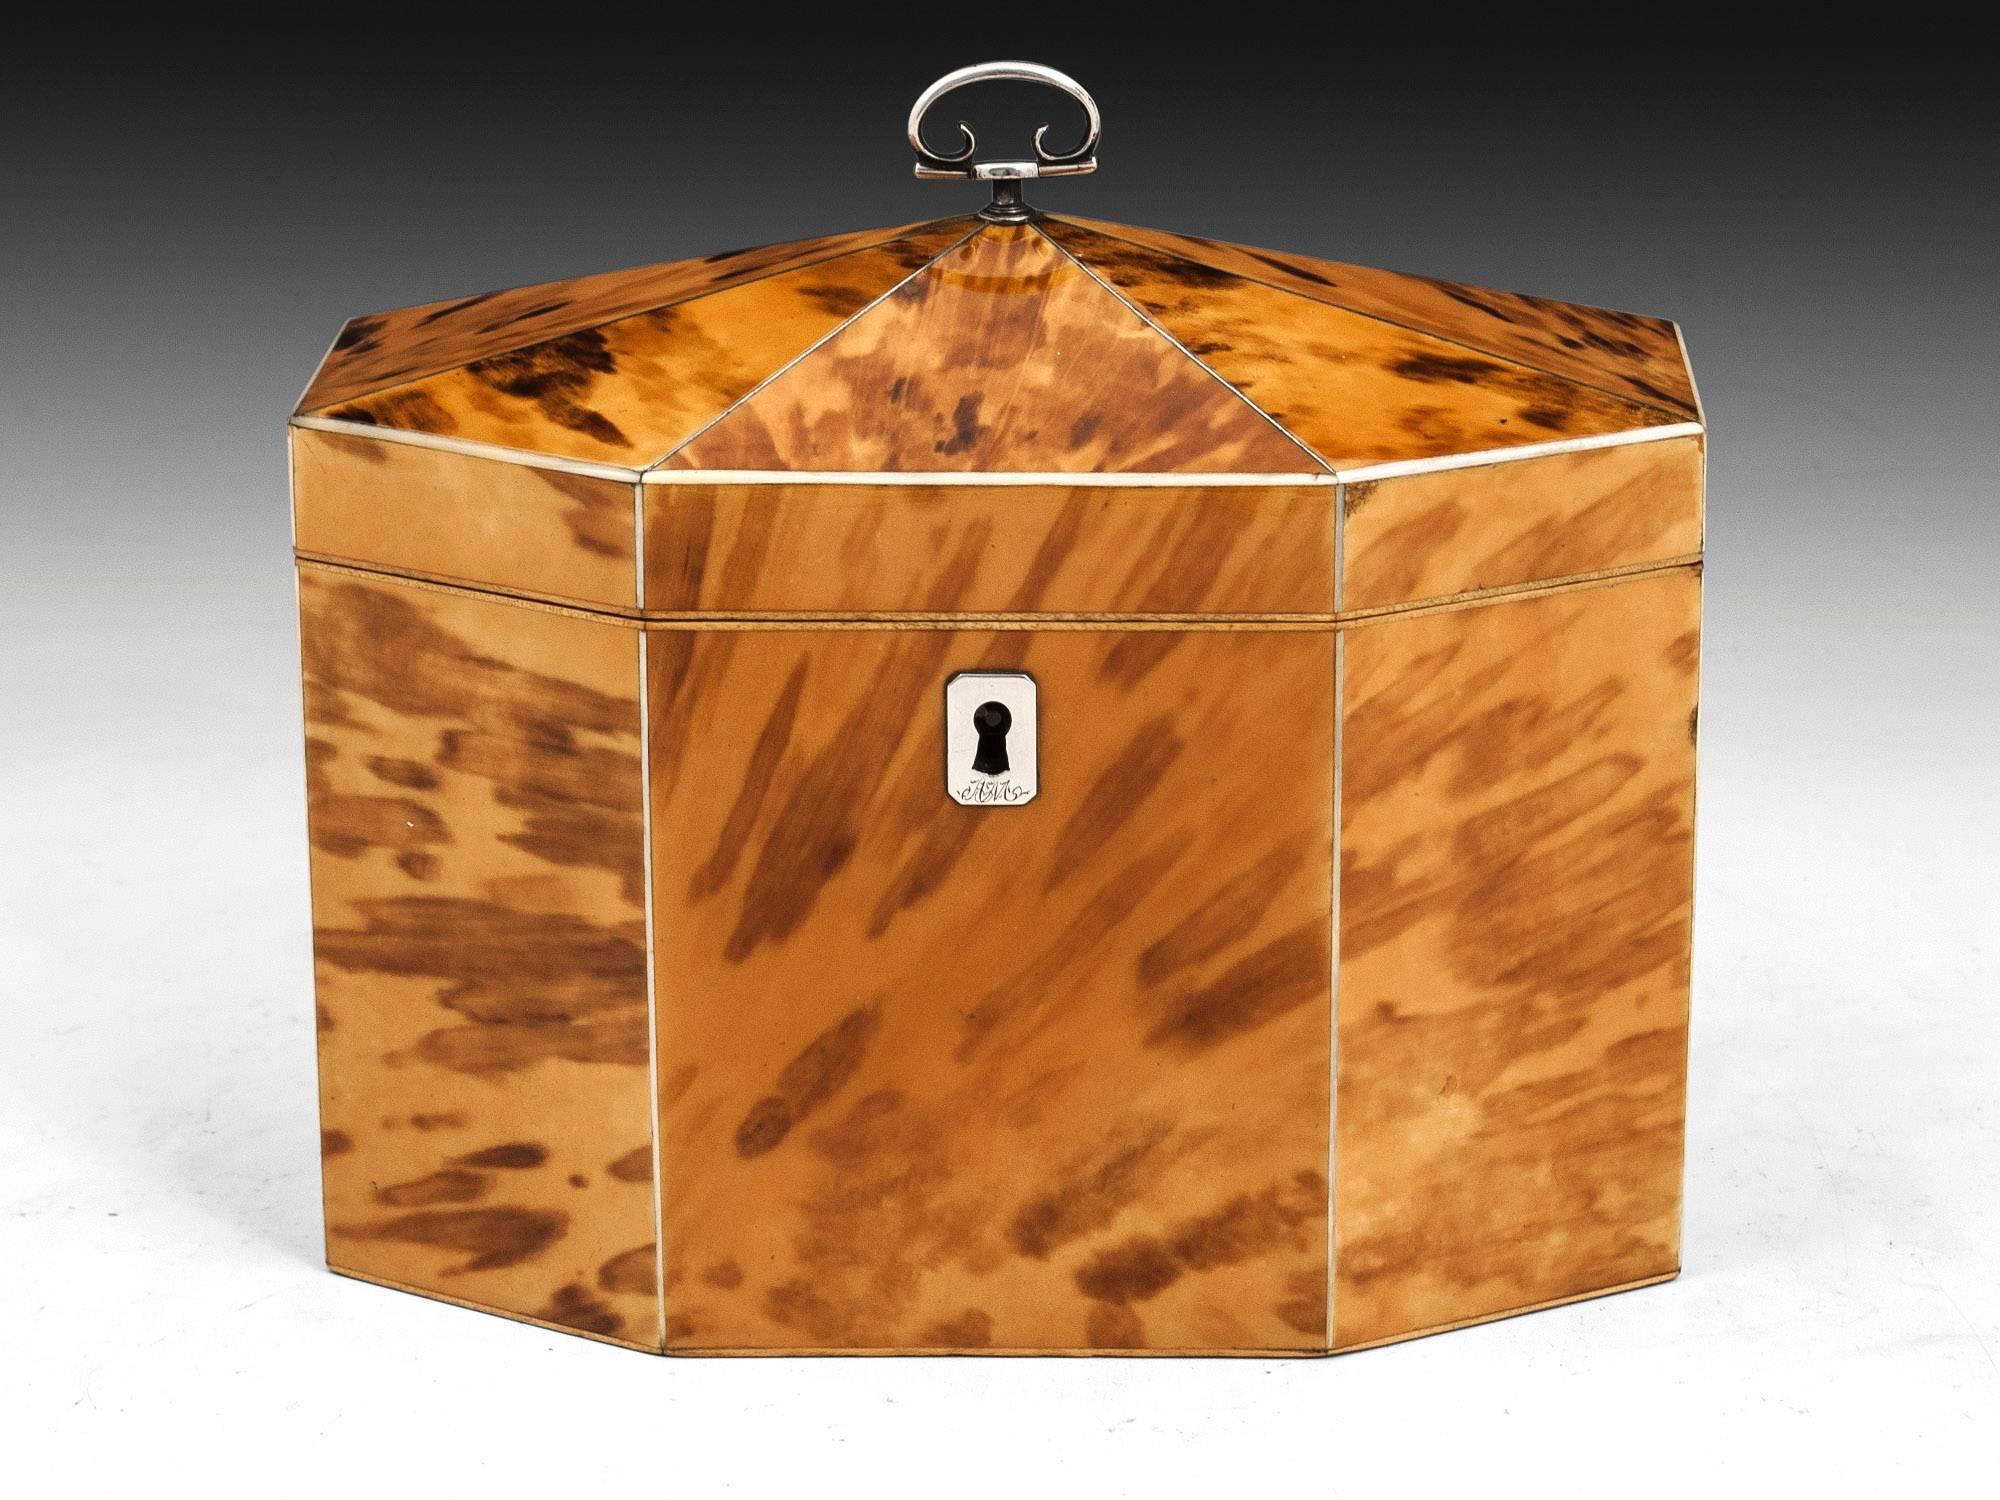 Exquisite blonde tented top tortoiseshell tea caddy with bone edges and stringing. The top features a beautiful sterling silver handle.

The interior features two tortoiseshell lids with bone handles and still contains traces of its original foil